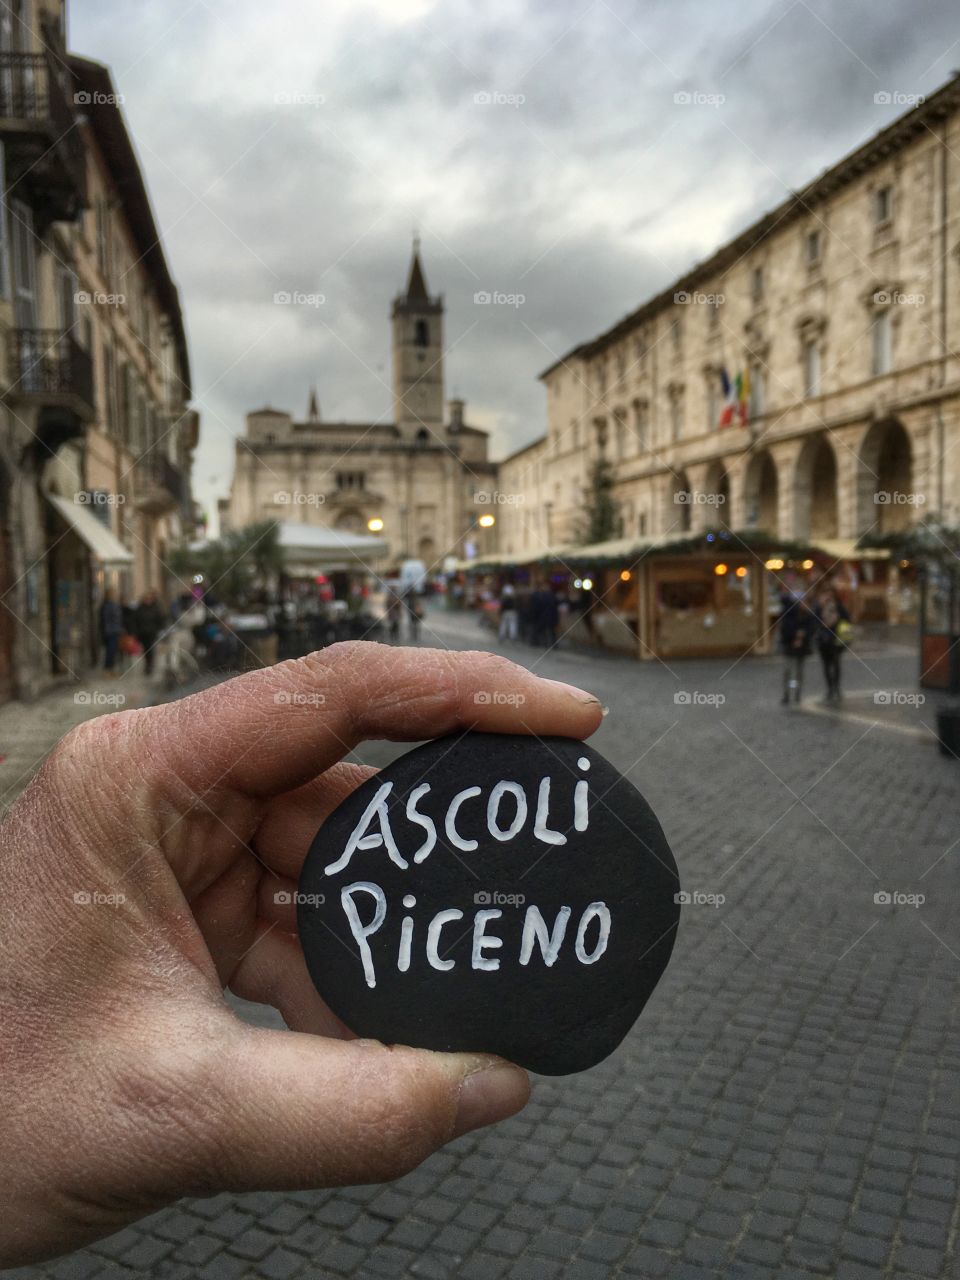 Ascoli Piceno, Arringo Square, the oldest monumental square of the city - you can visit the Fonzi palace, the Arengo palace, the Bishop's palace, the Cathedral of St. Emidio and the Baptistery of San Giovanni